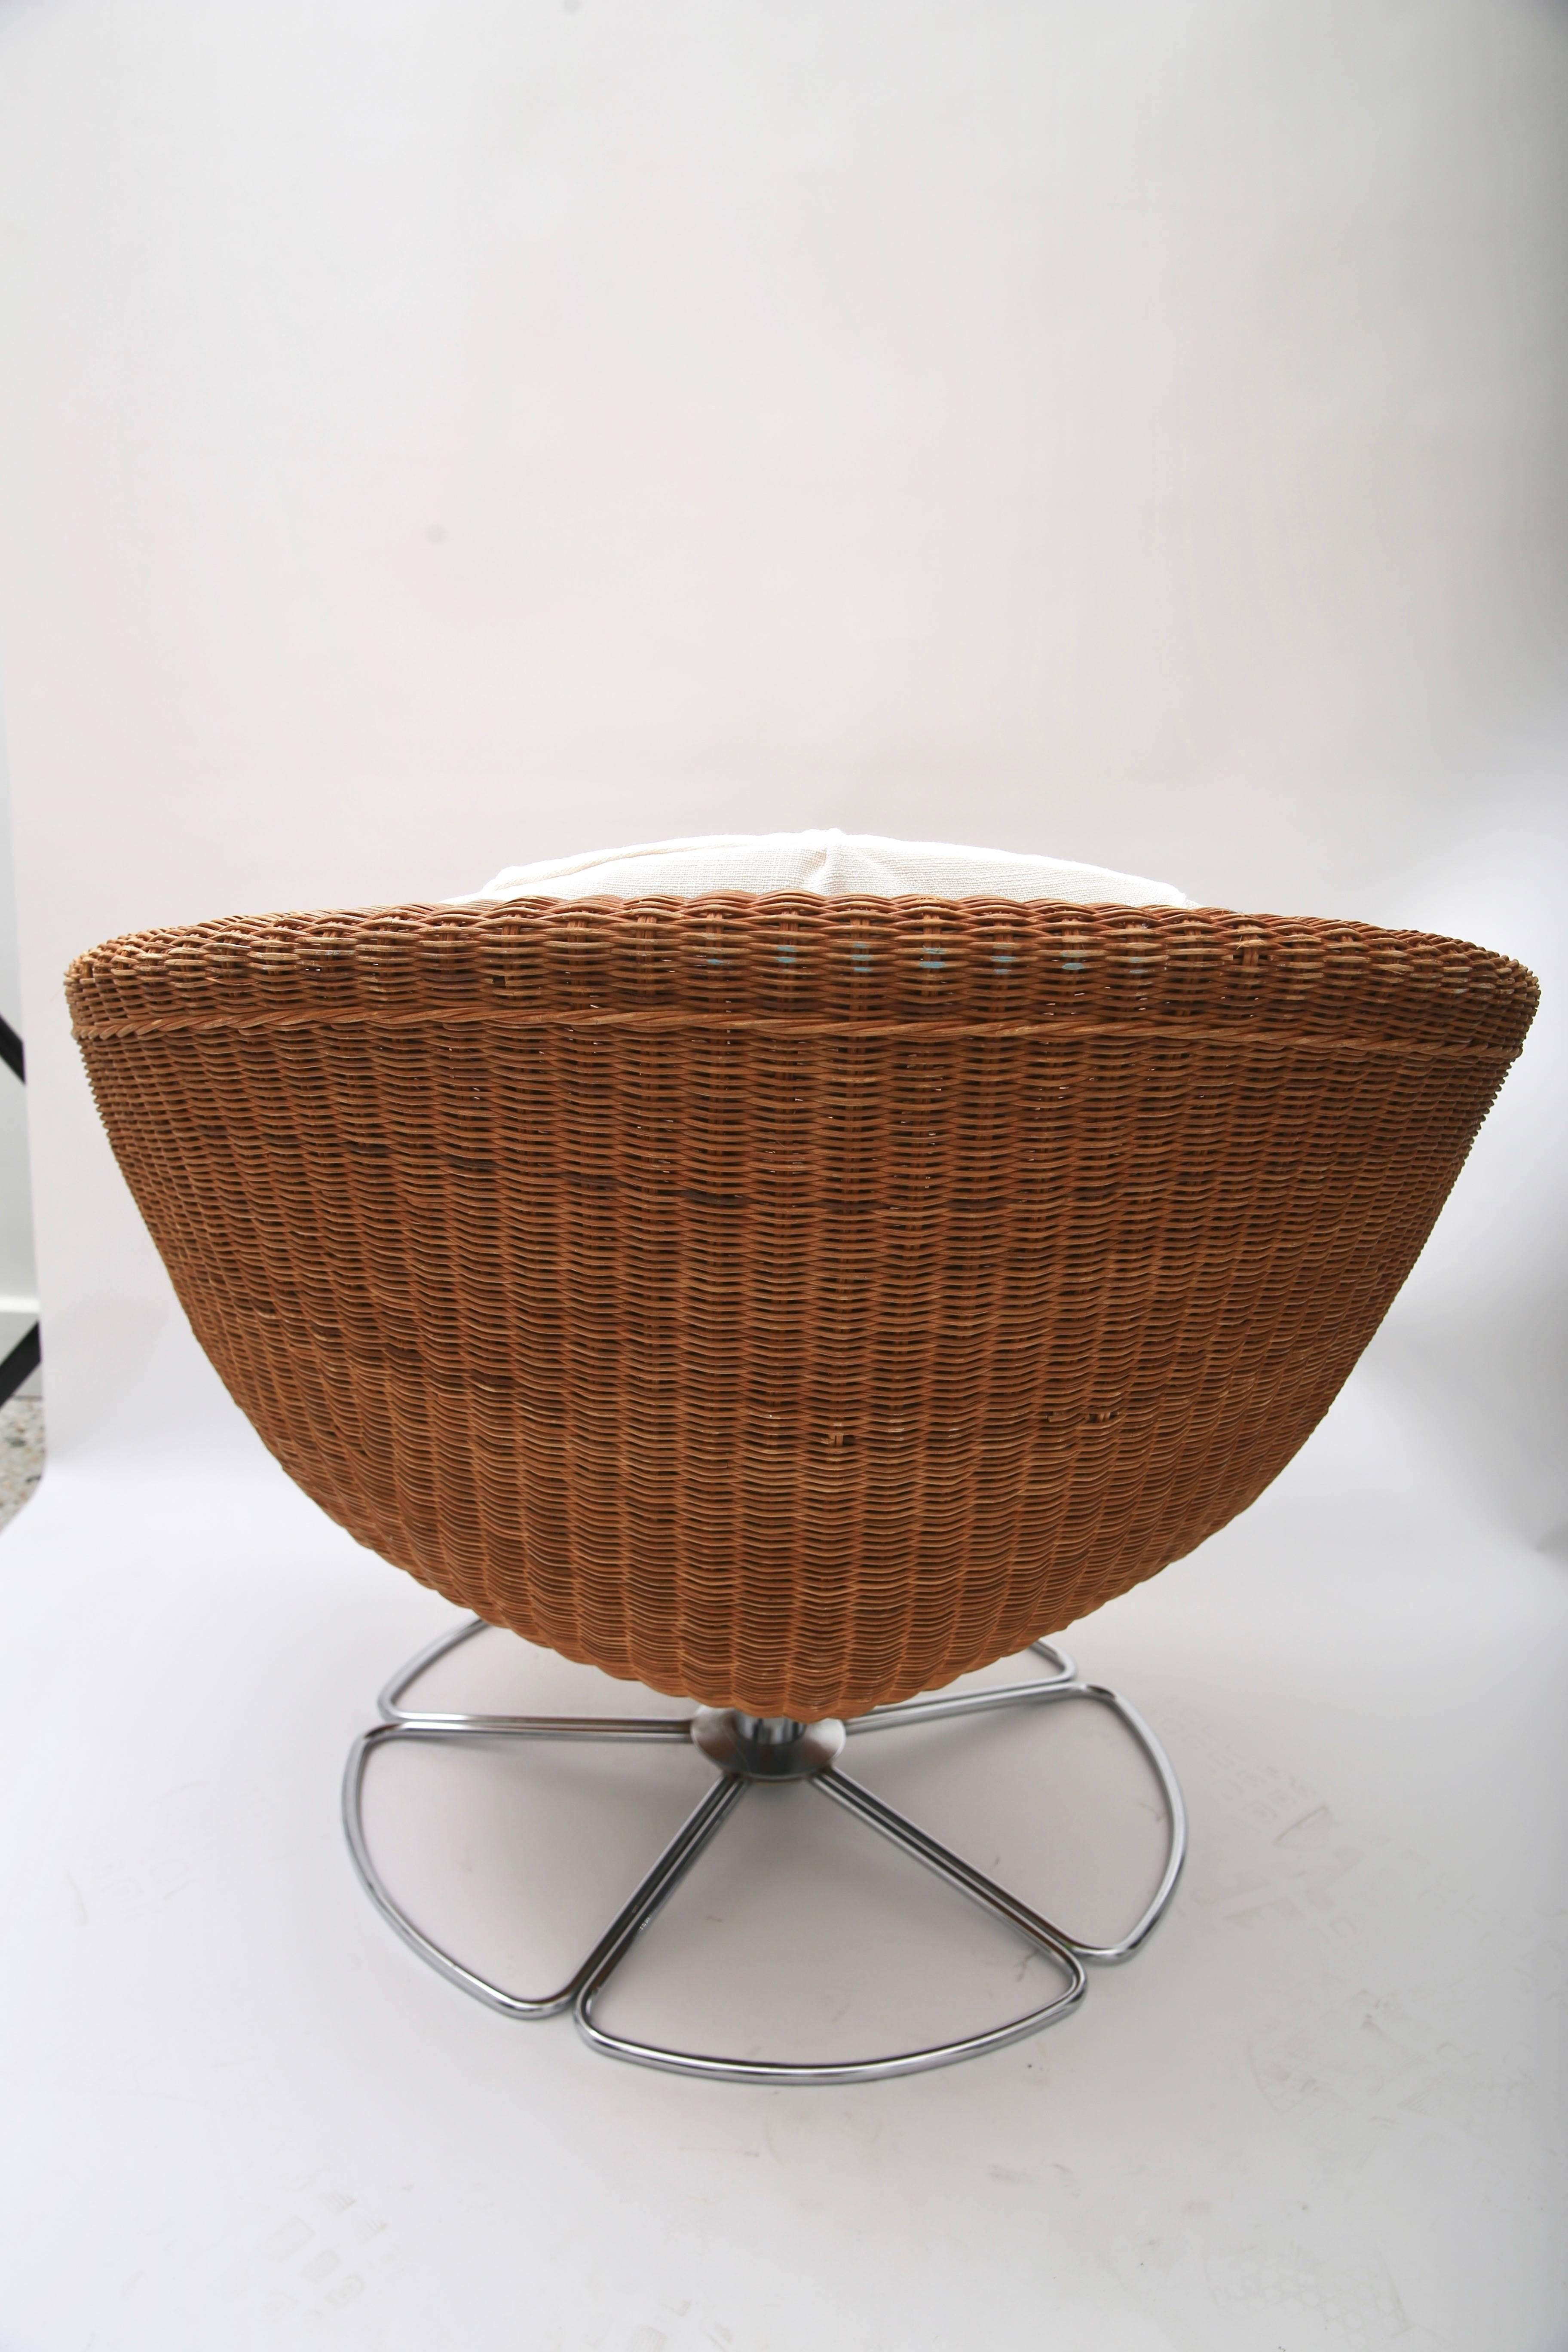 Steel Pair of Bohemian Swivel Chairs in Woven Wicker and Polished Chrome